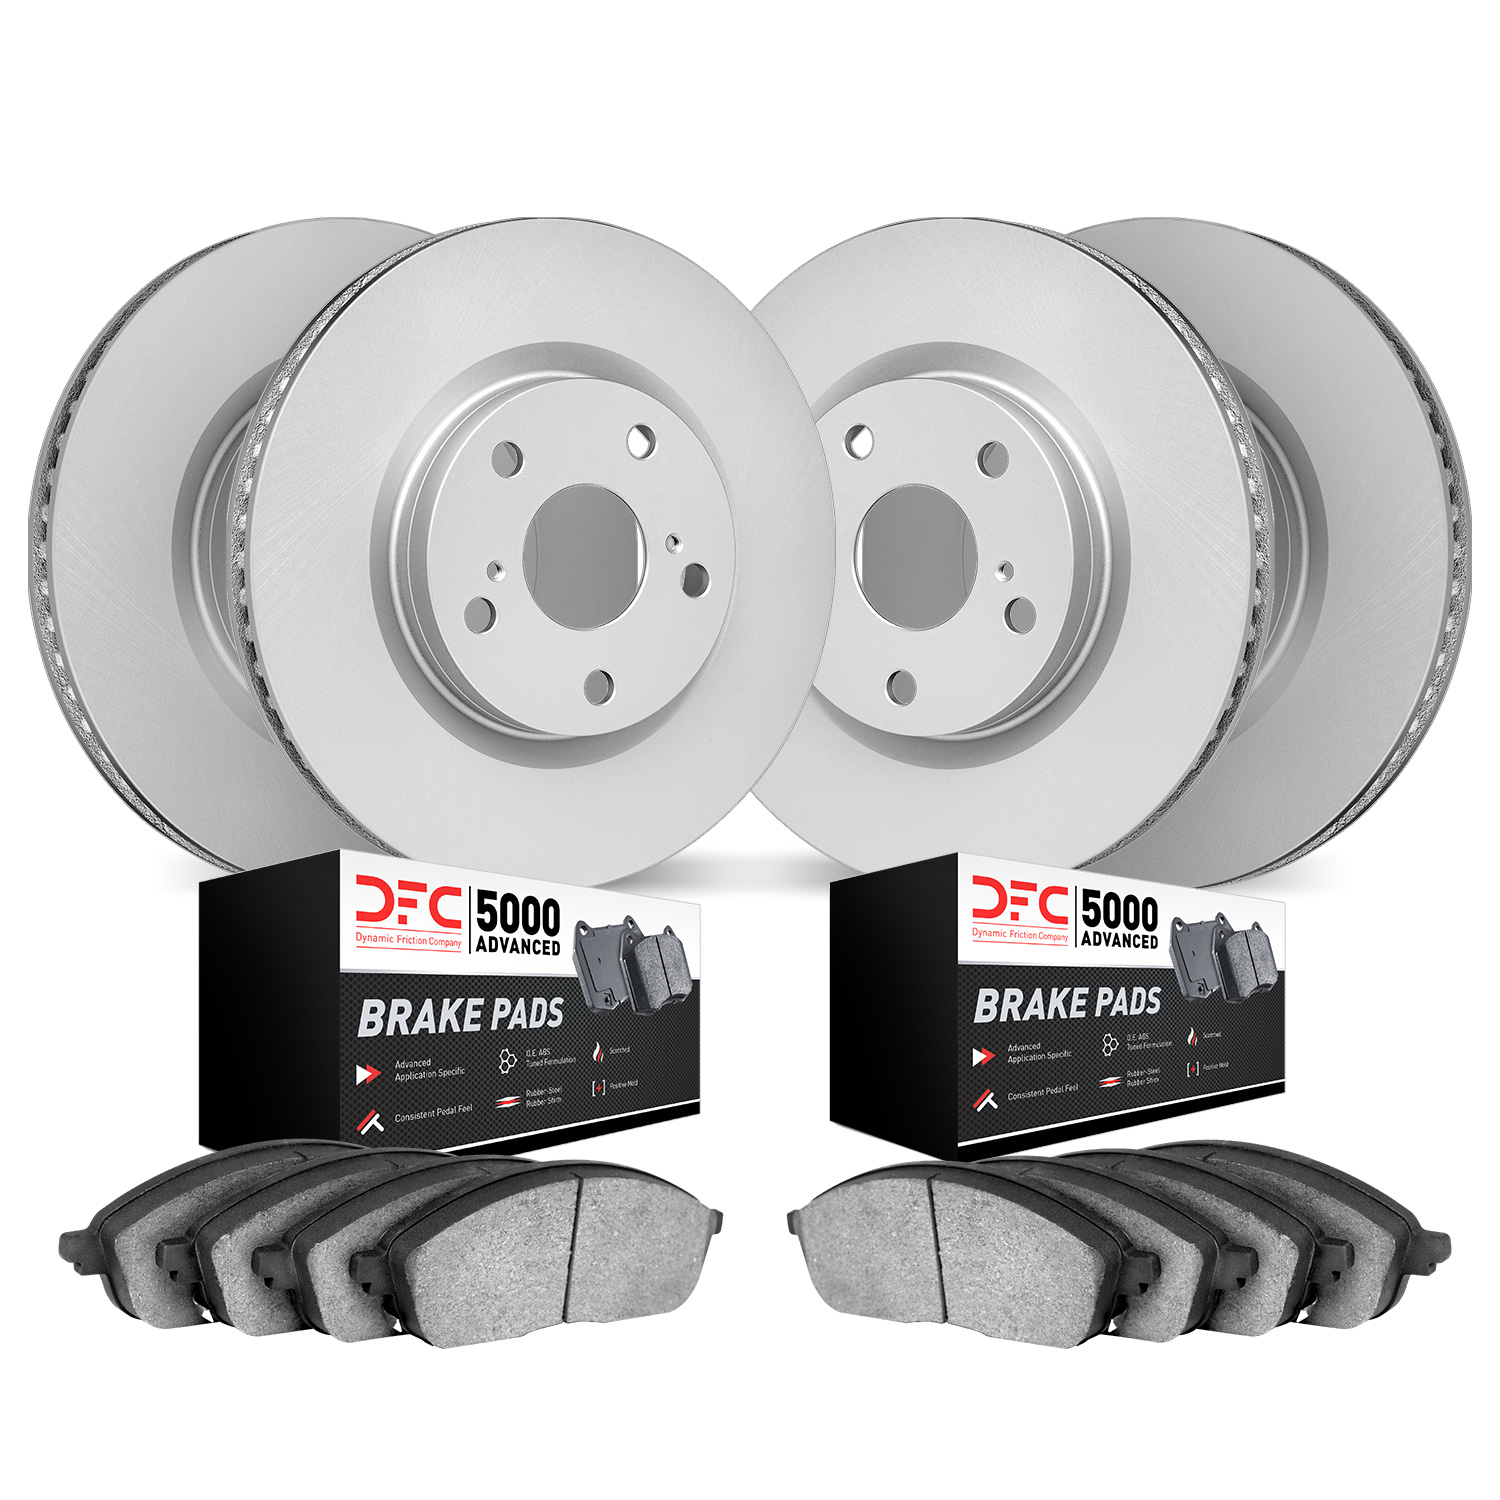 4504-11021 Geospec Brake Rotors w/5000 Advanced Brake Pads Kit, 2020-2020 Land Rover, Position: Front and Rear